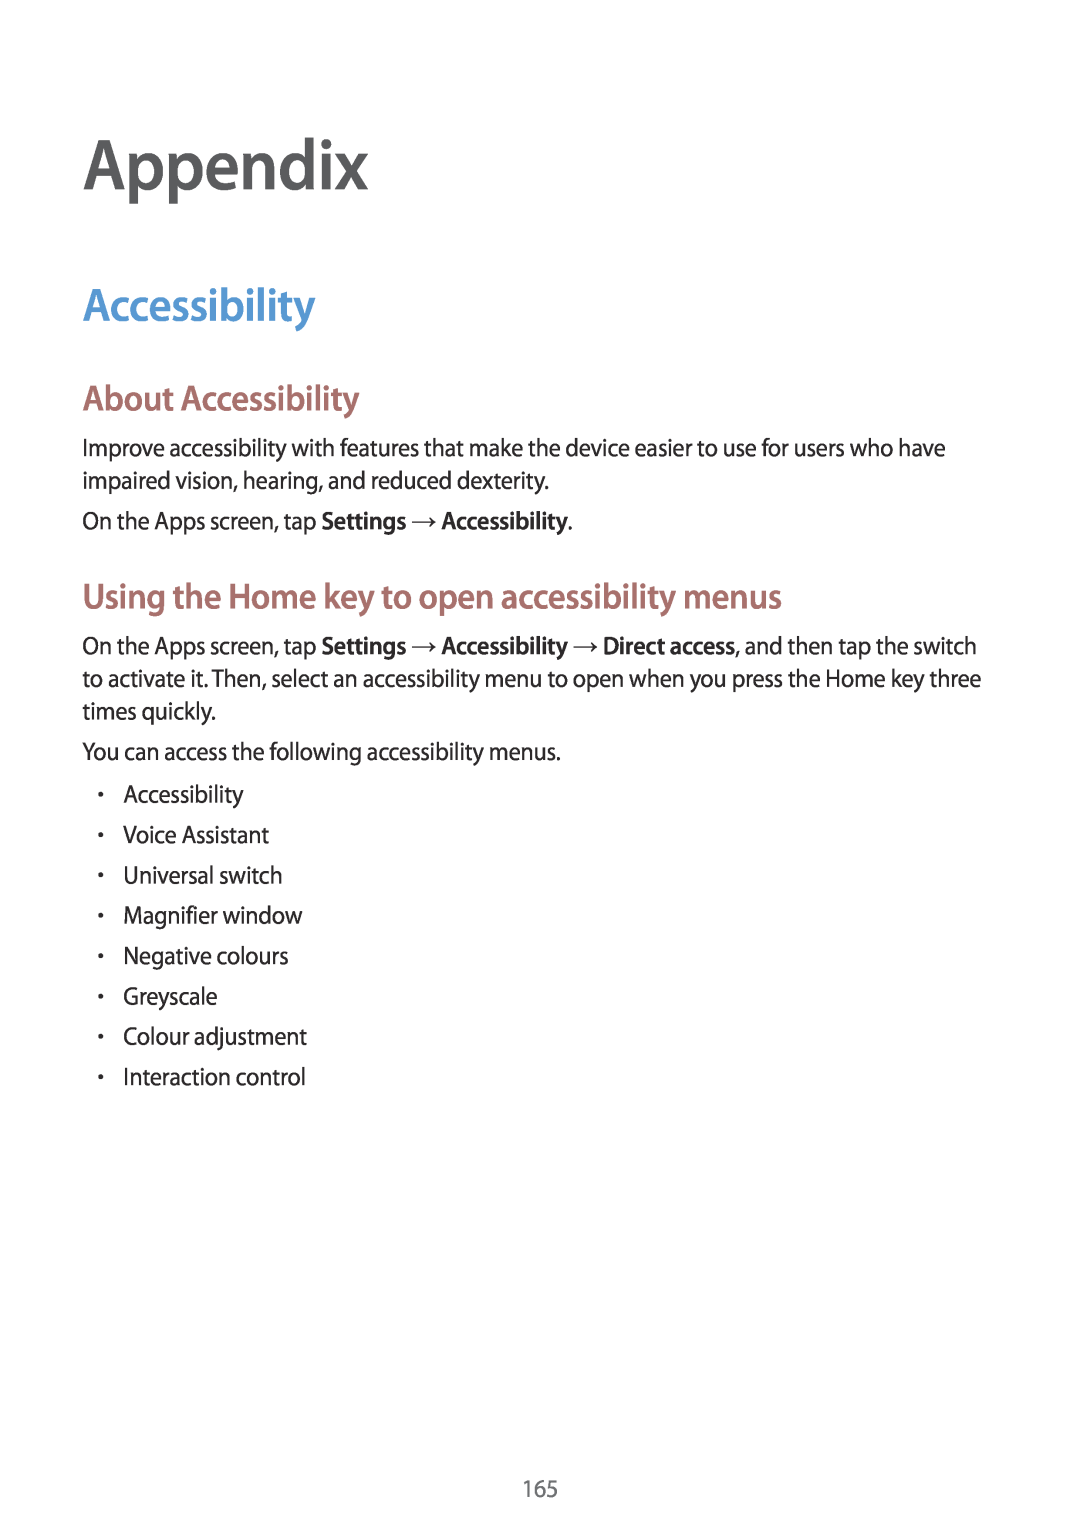 Samsung SM-G928FZSASEB, SM-G925FZKADBT manual Appendix, About Accessibility, Using the Home key to open accessibility menus 